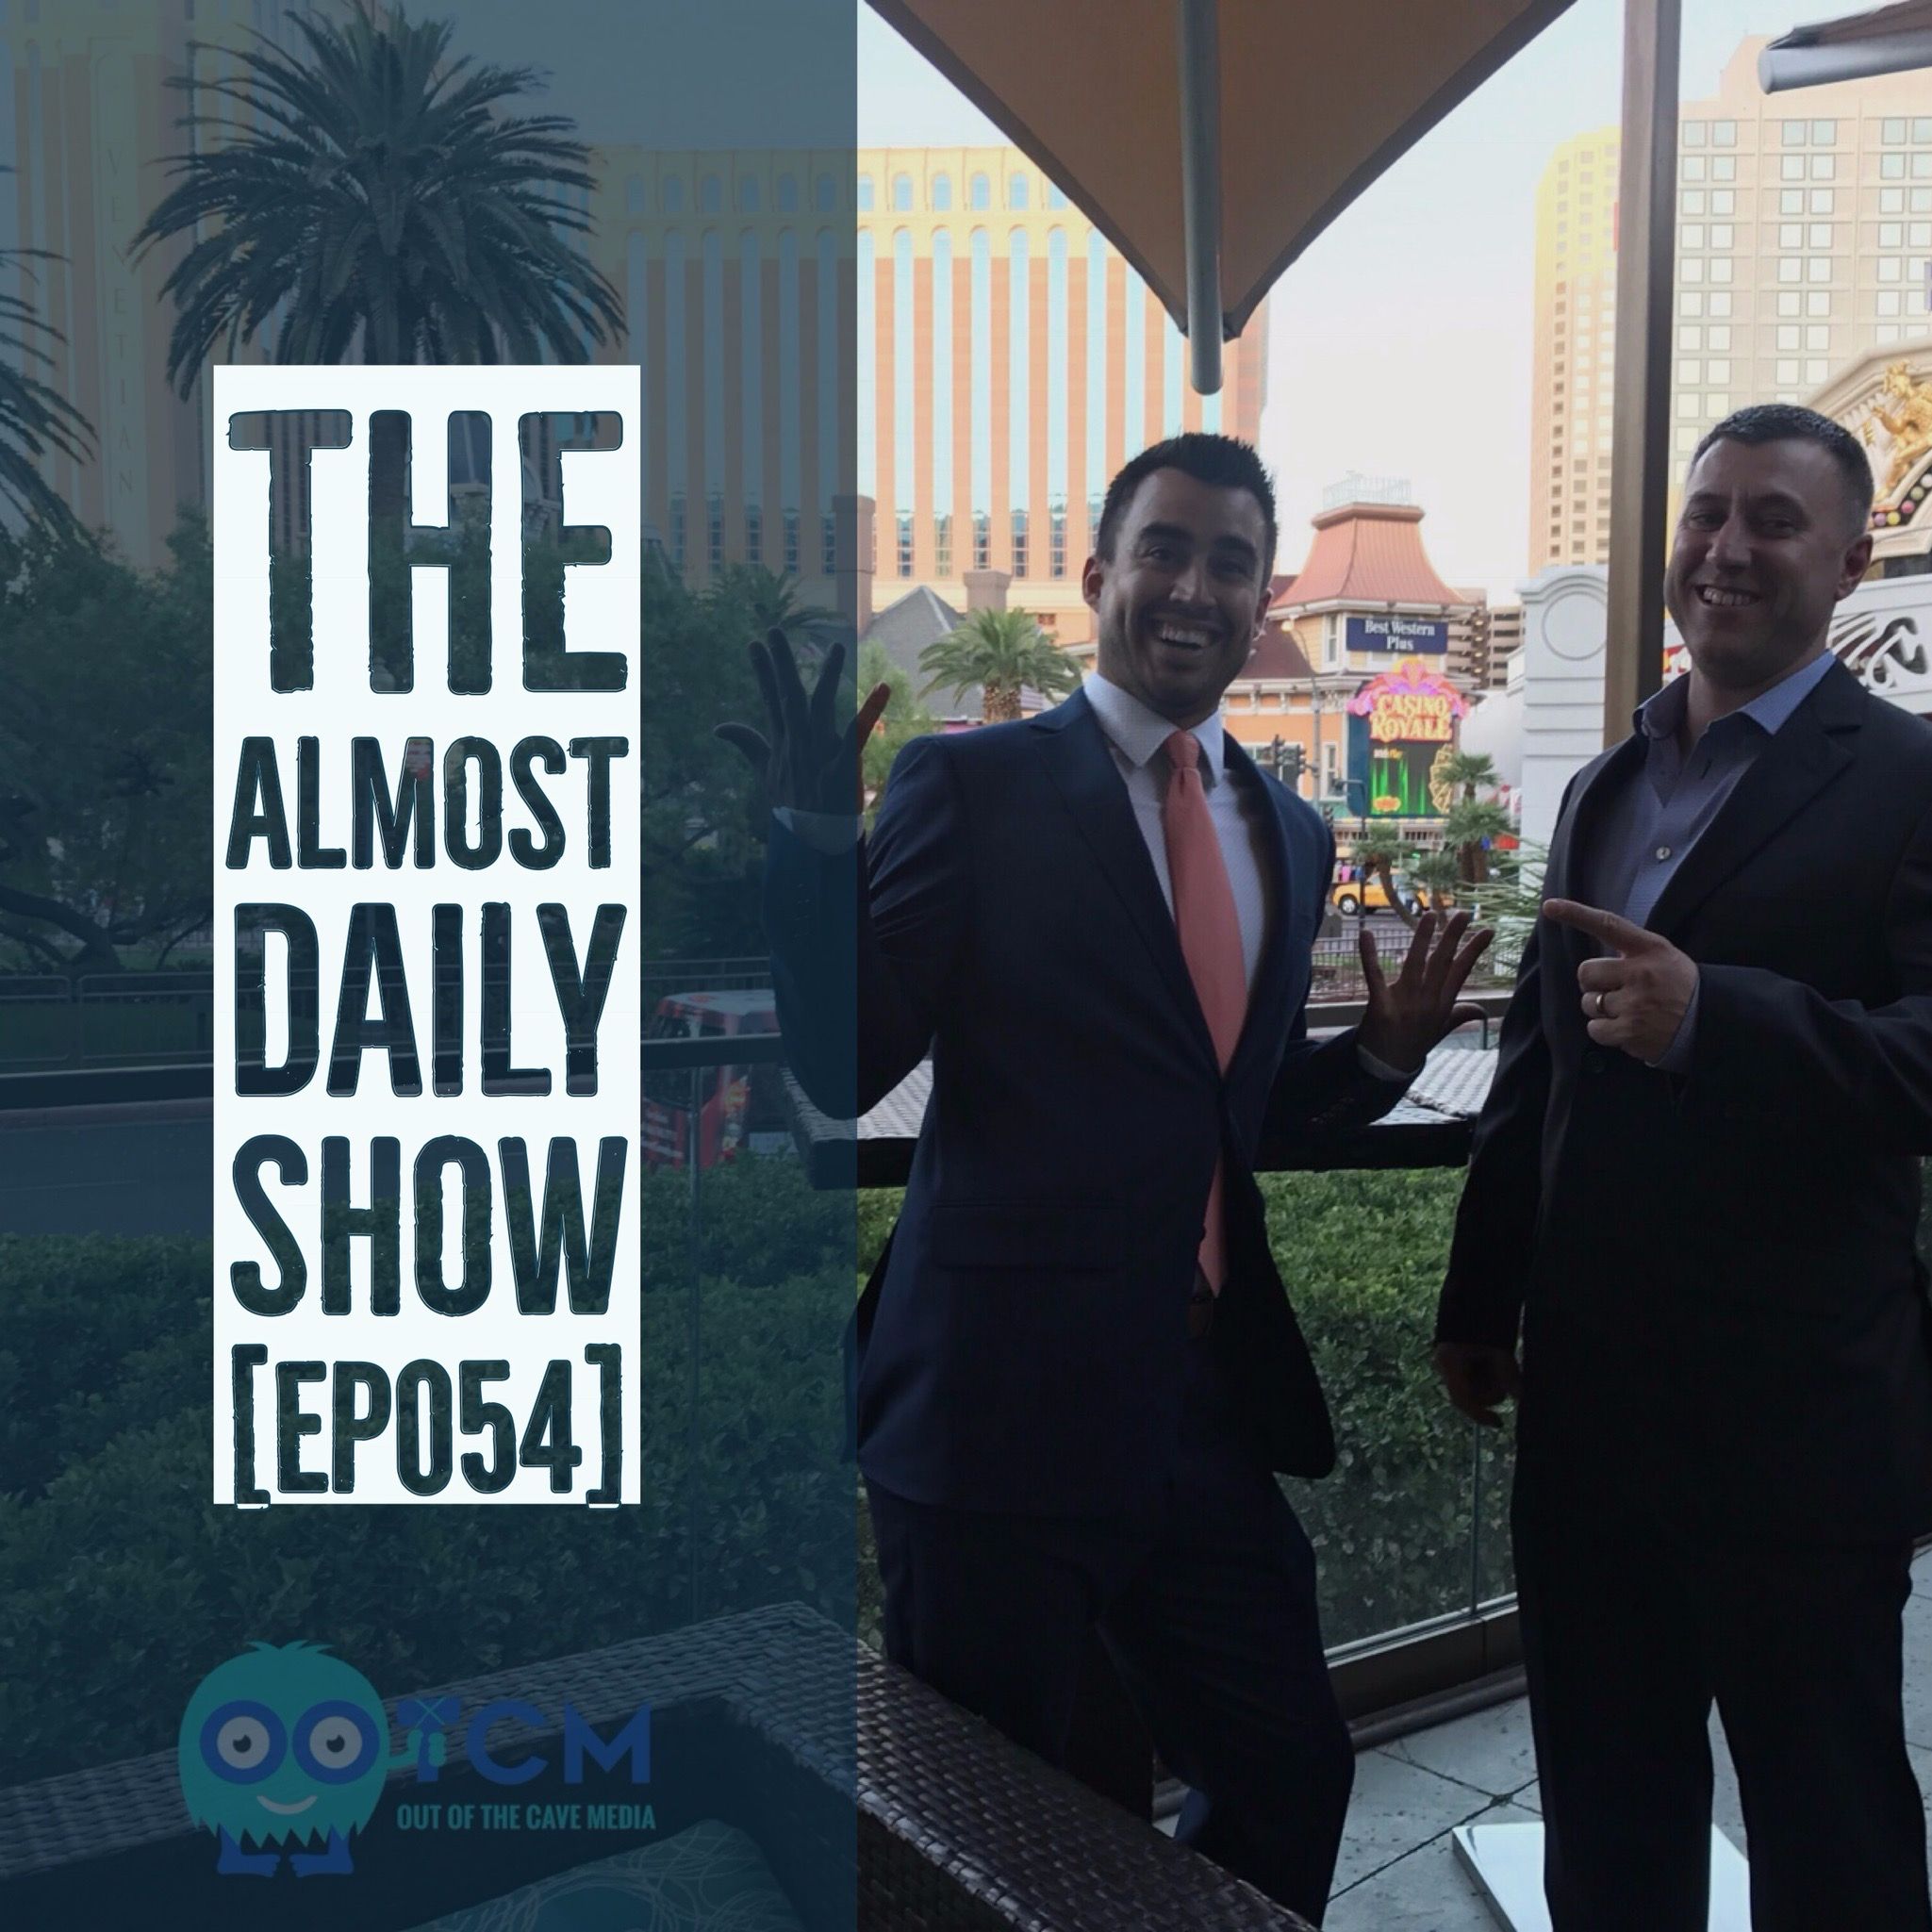 Tiered Pricing and Online Education | The Almost Daily Show Ep 054